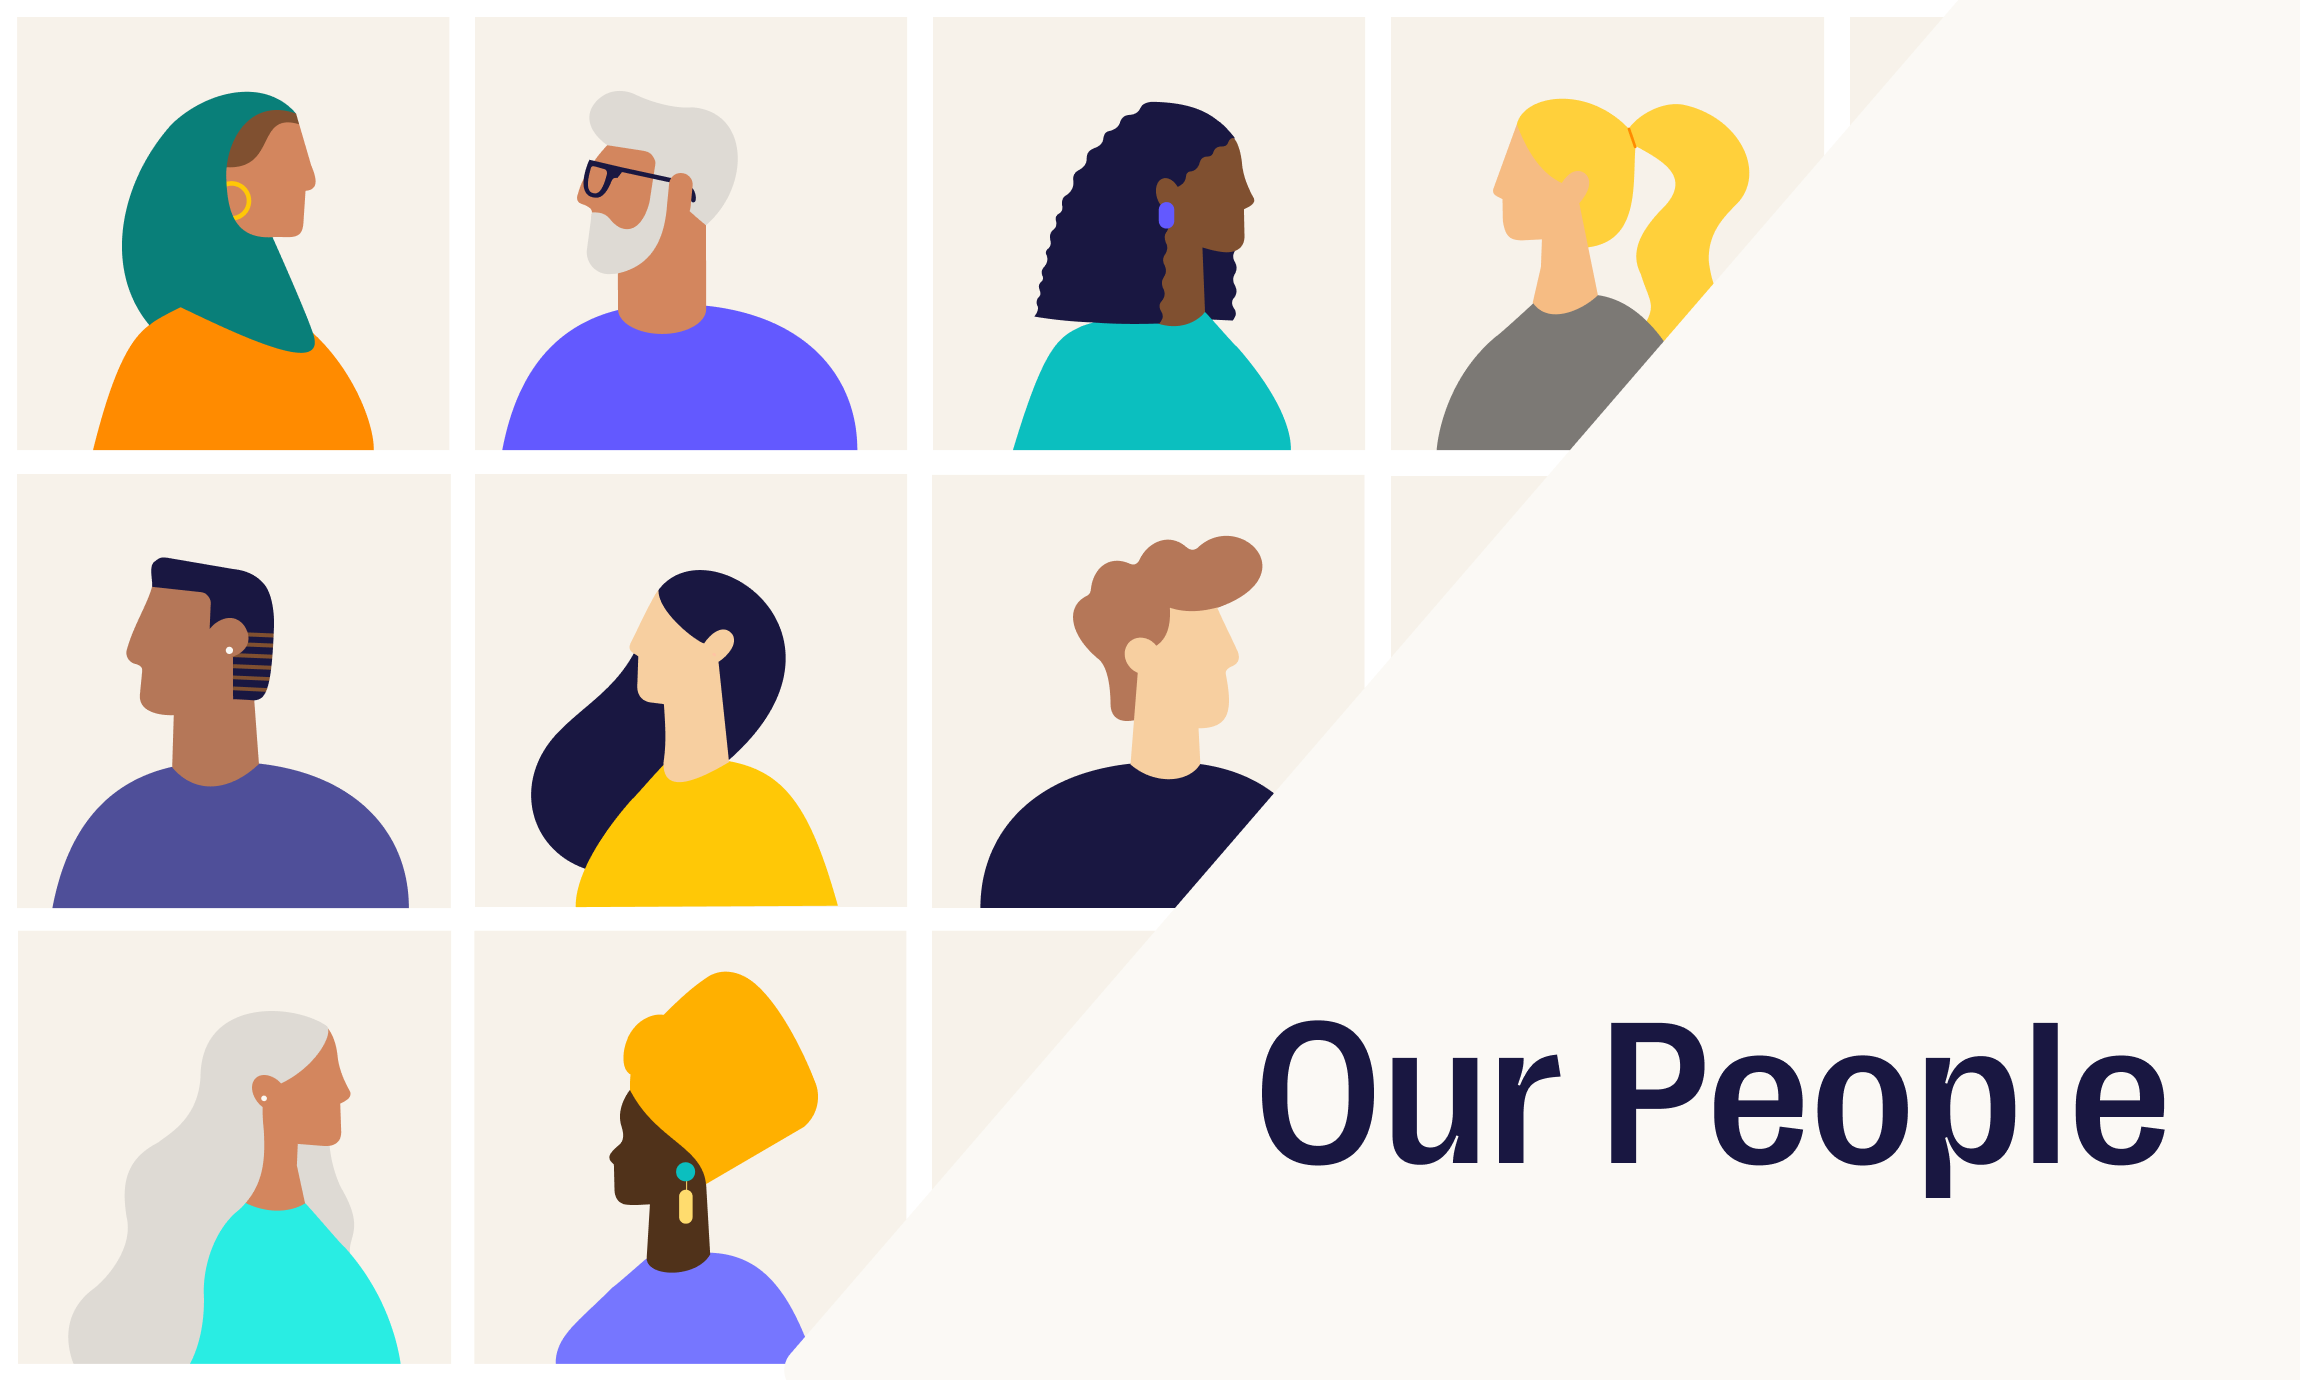 Our People: Our Values